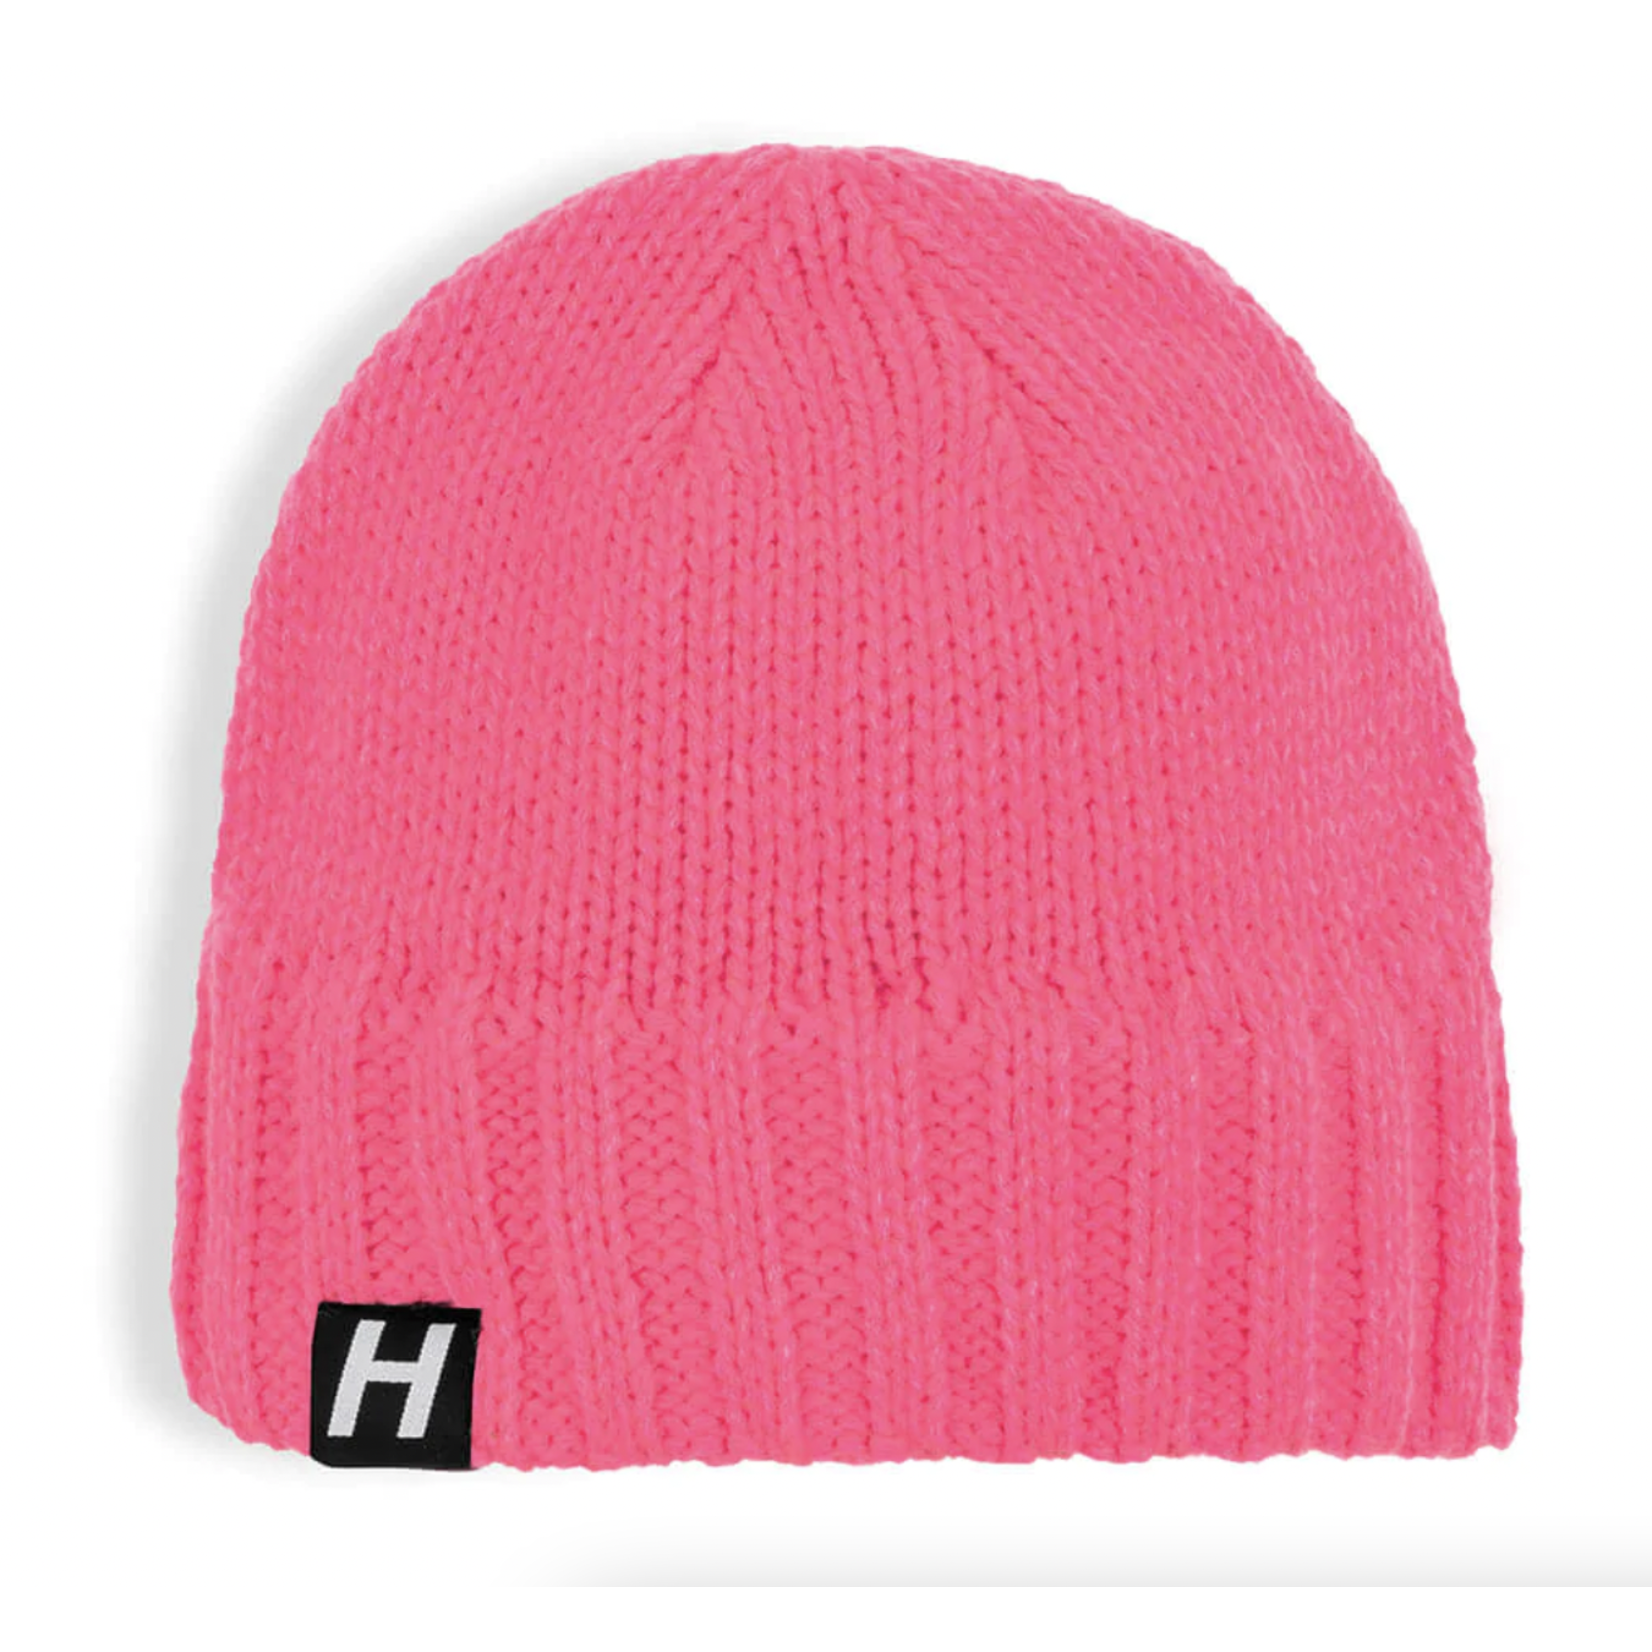 Classic Beanie - Neon Pink - The Brass Owl